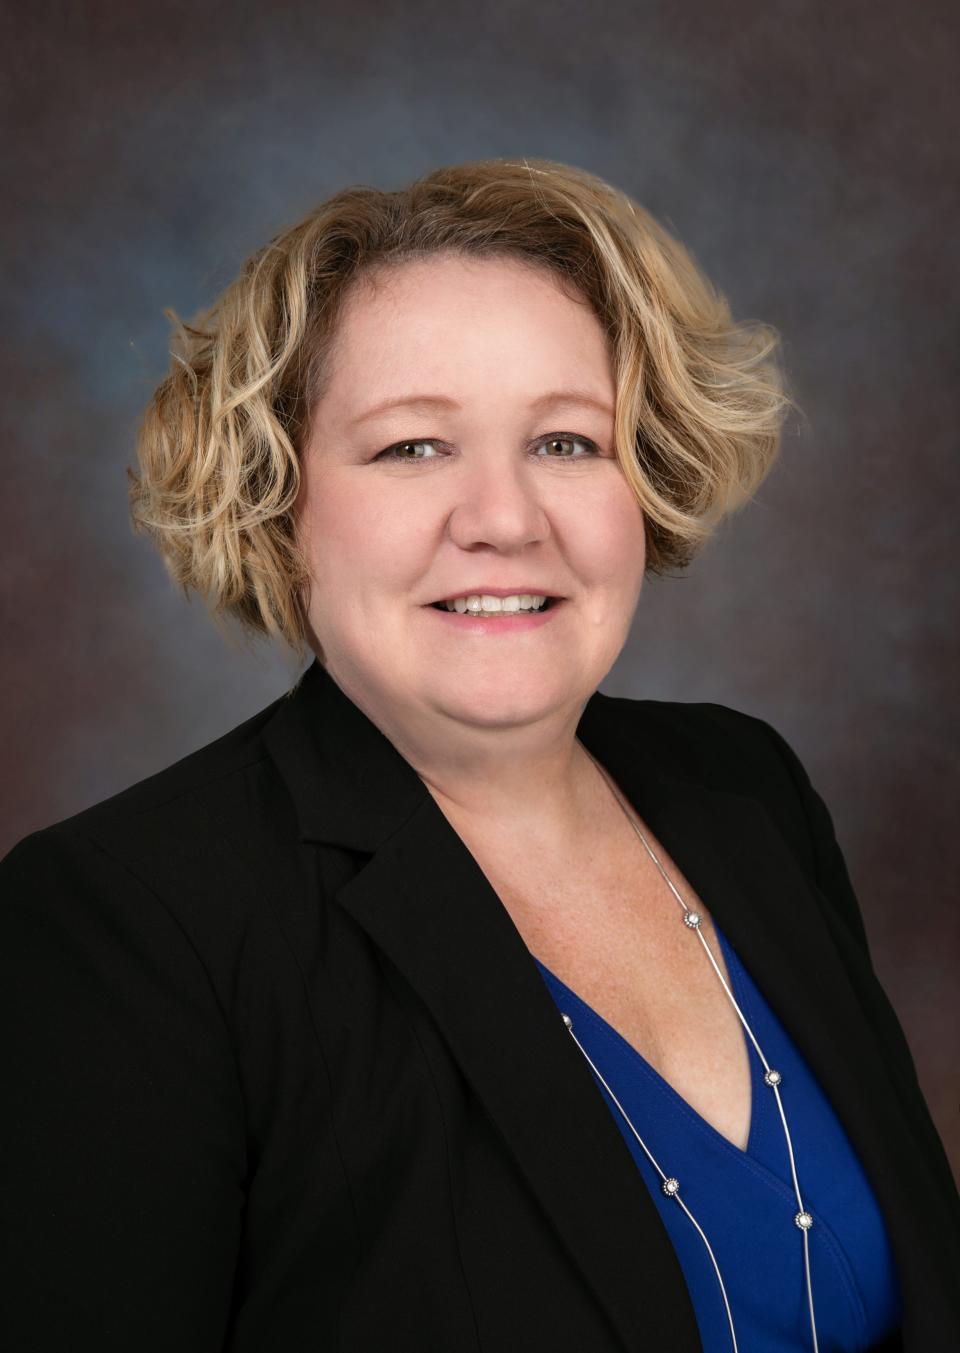 Eva Rey is vice president of community management and communications for The Viera Co., developers of the Viera planned community in Brevard County.